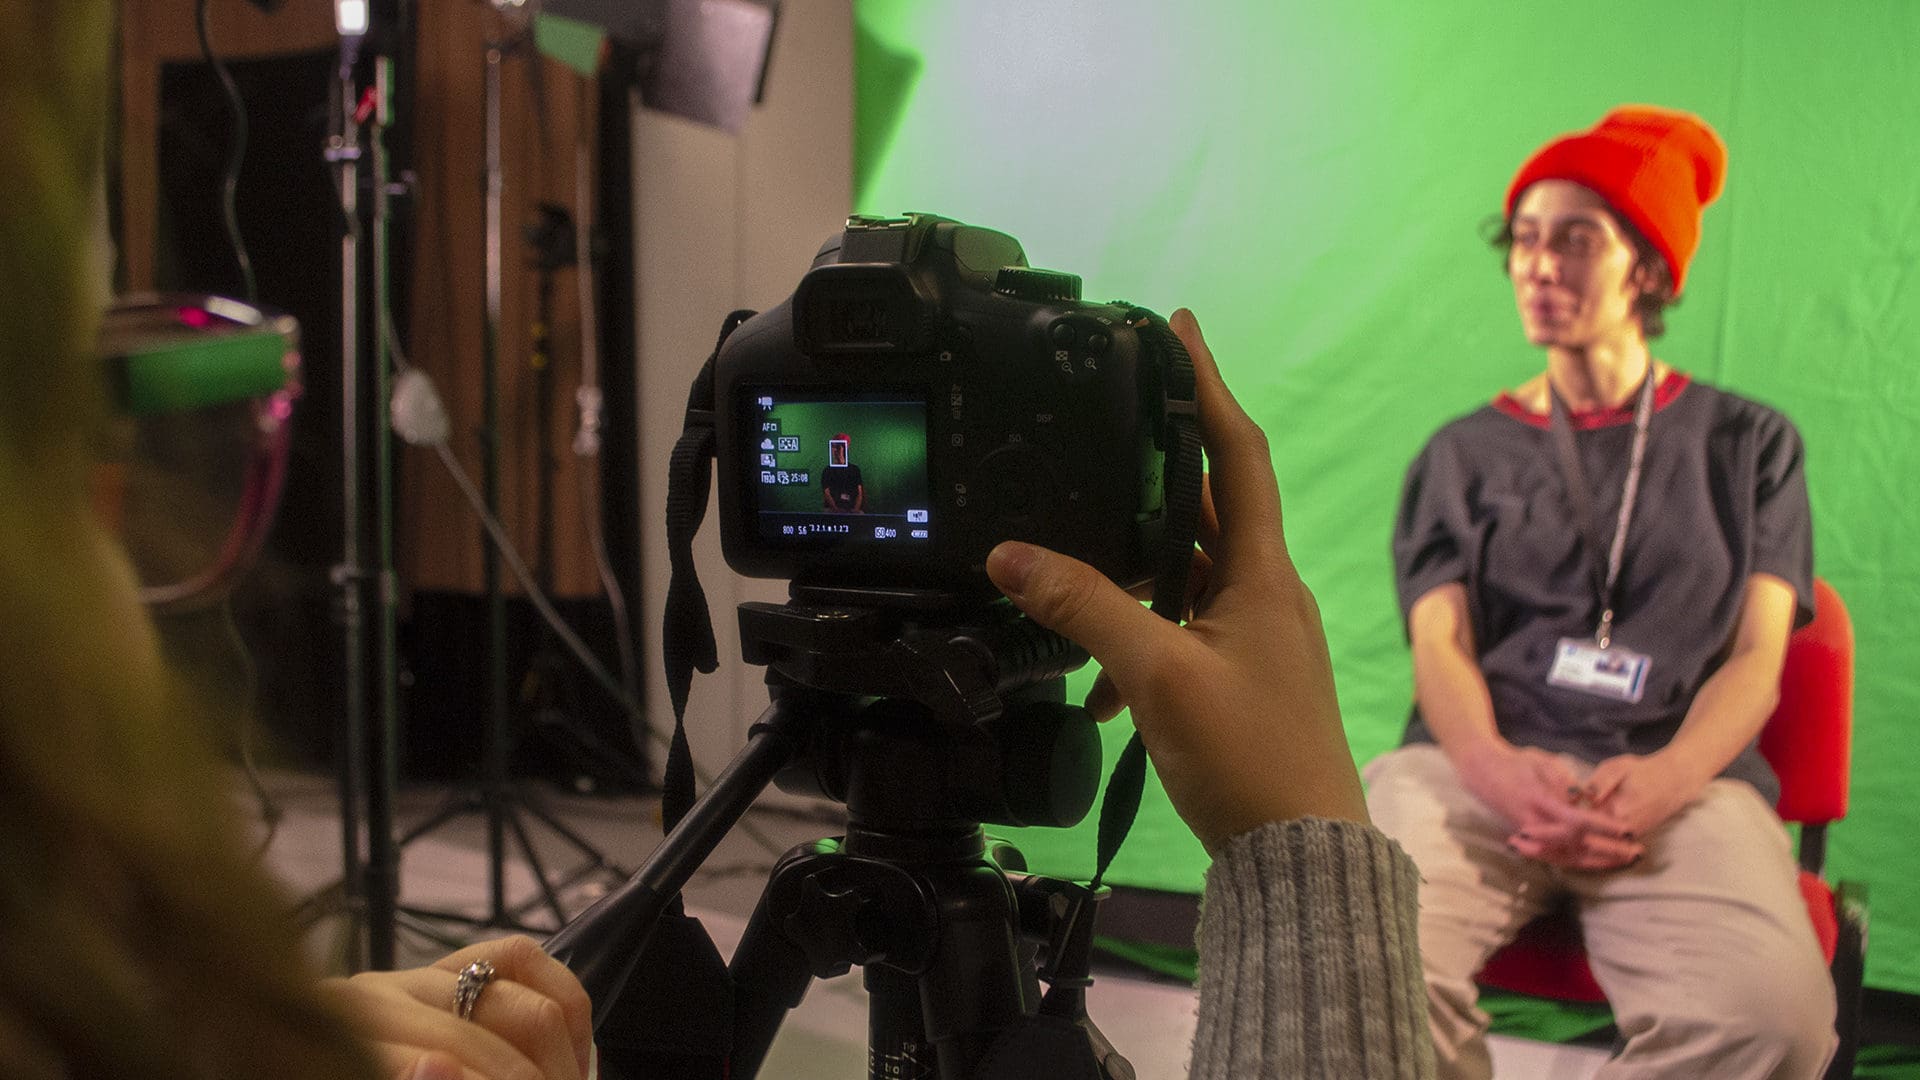 City of Bristol College Creative Media student filming on green screen